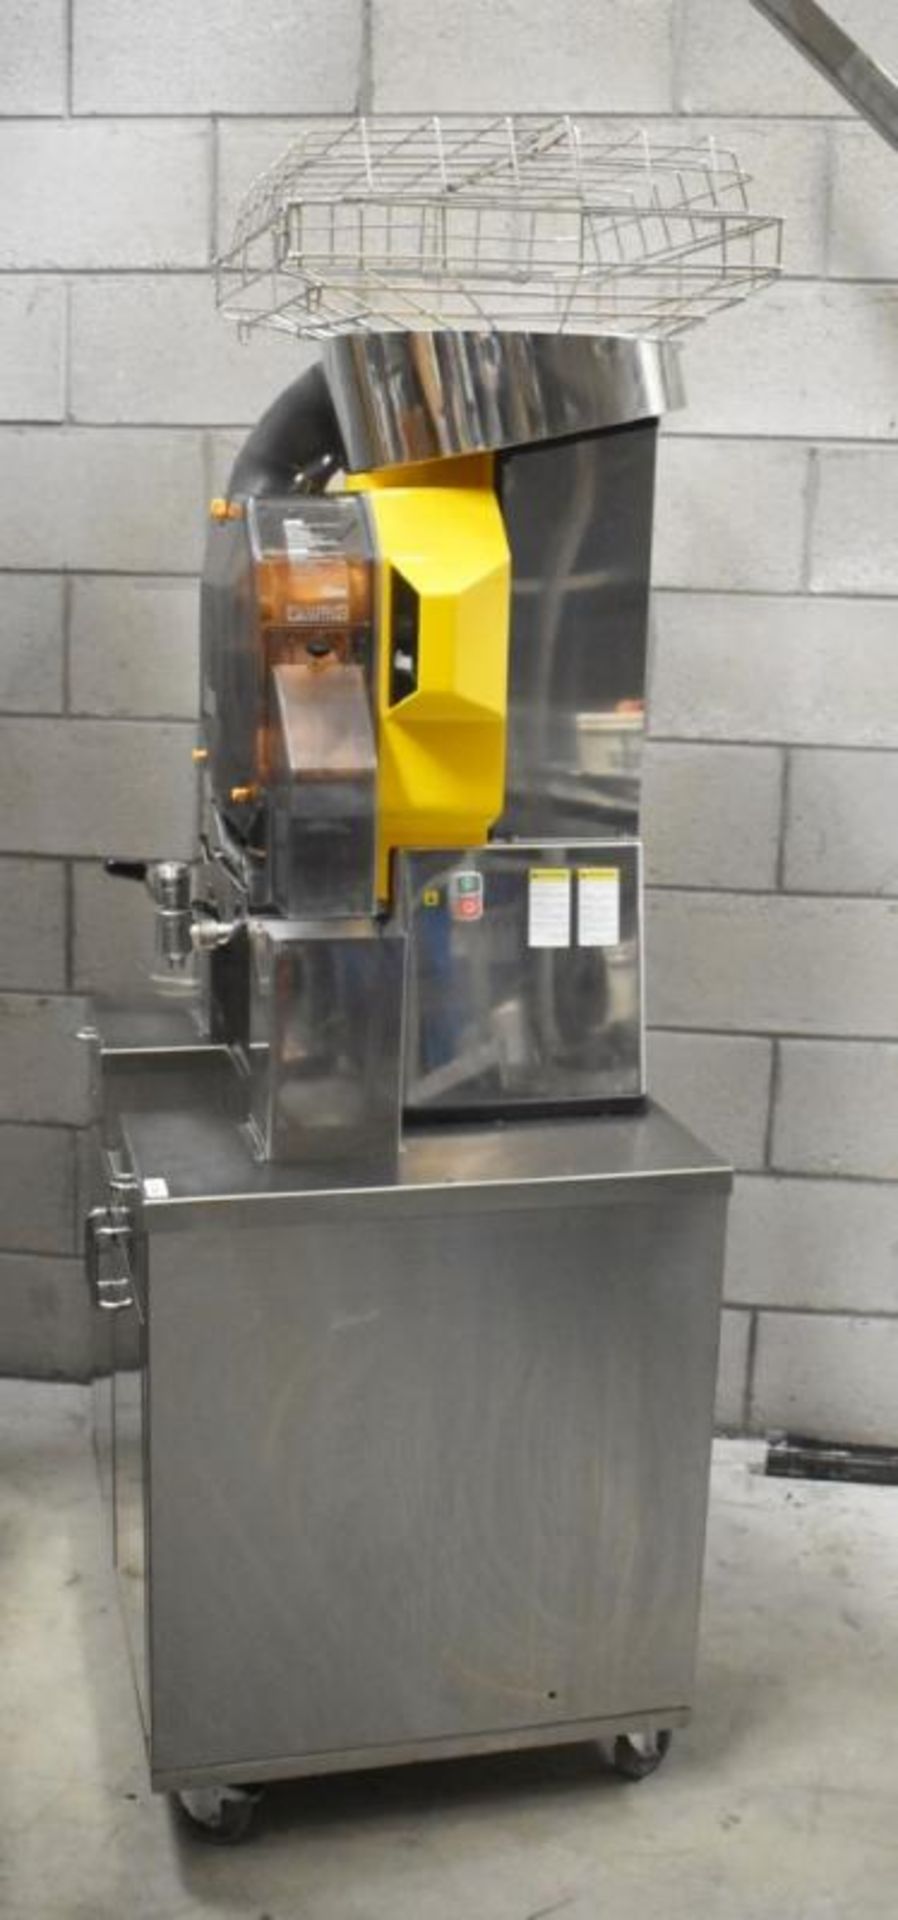 1 x Zumex Speed S +Plus Self-Service Podium Commercial Citrus Juicer - Manufactured in 2018 - Ideal - Image 21 of 21